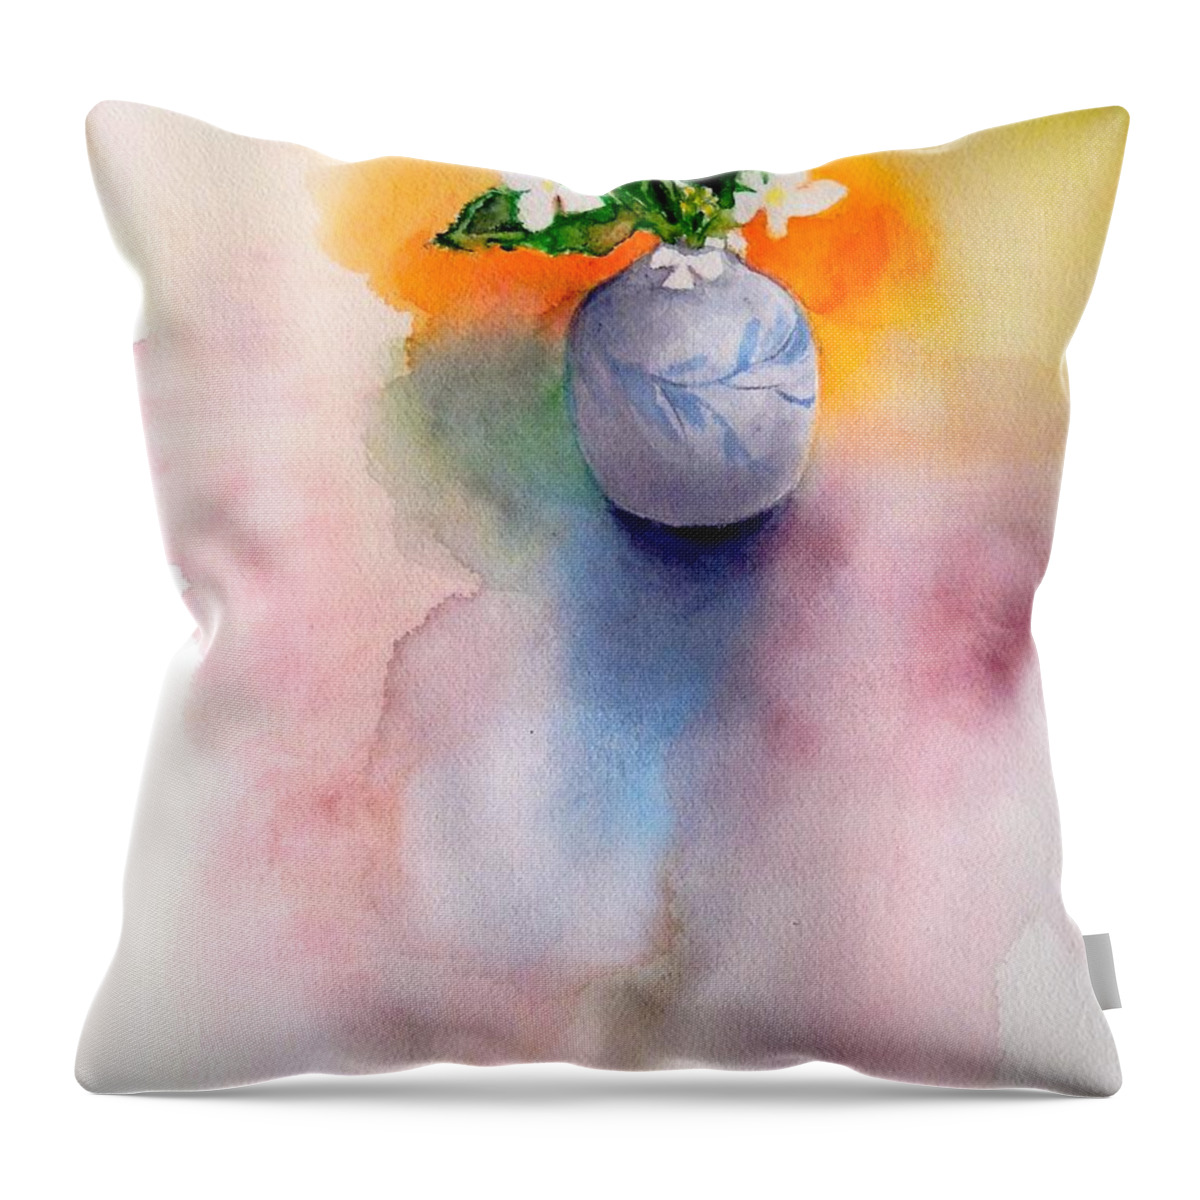 Flower Throw Pillow featuring the painting Tiny Vase and Flowers by Yoshiko Mishina